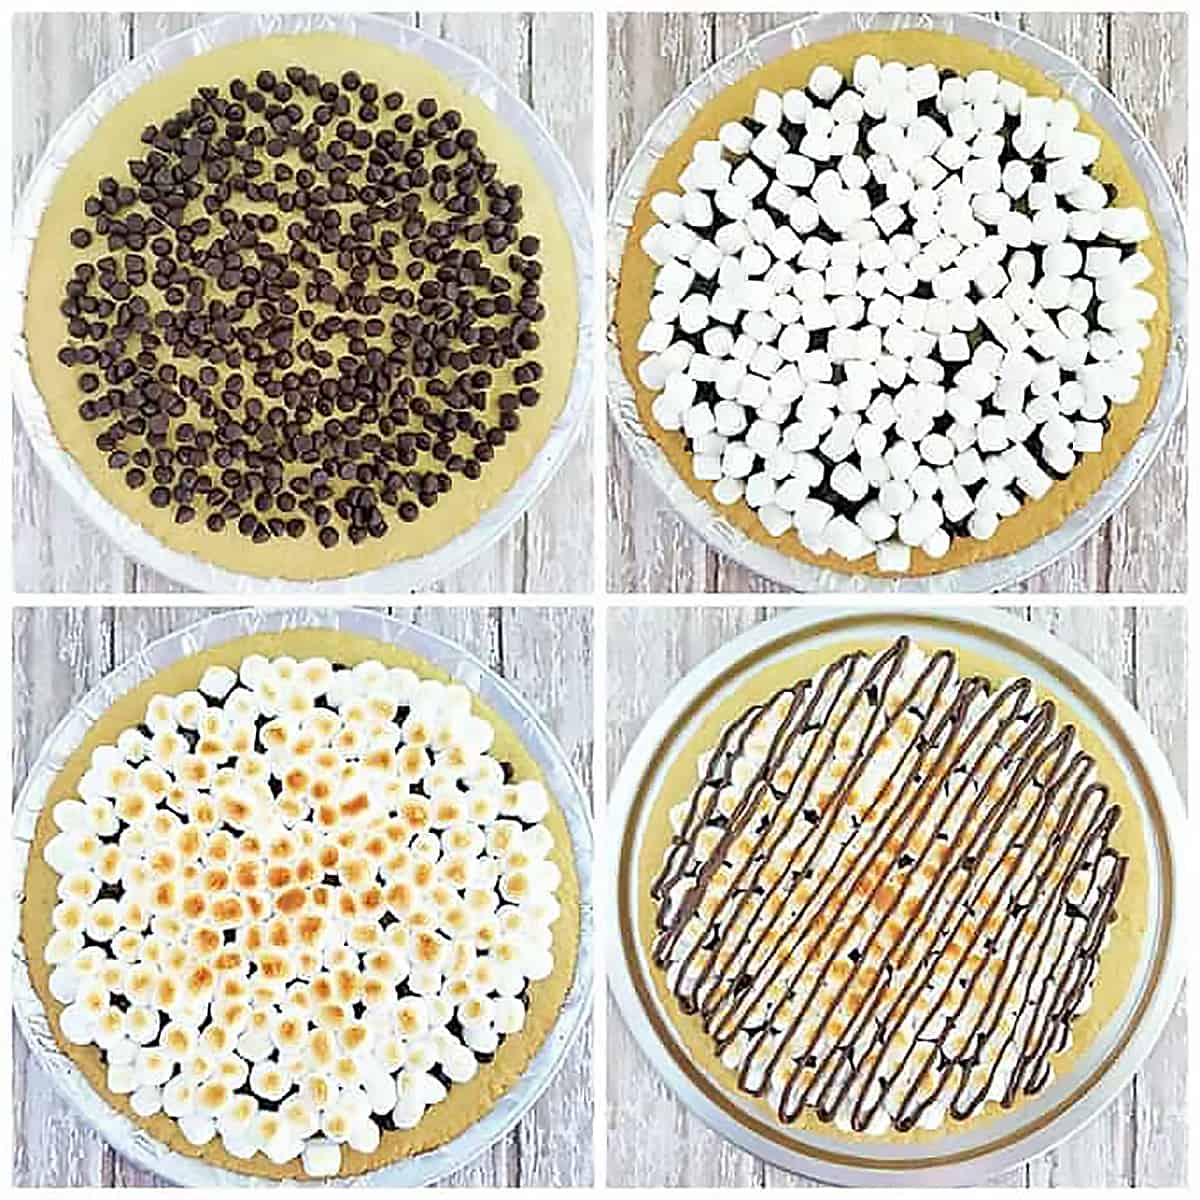 Once your s’mores pizzas are out of the oven, place 1 cup of chocolate chips into a Ziploc bag and melt in the microwave. Drizzle melted chocolate sauce over each pizza.